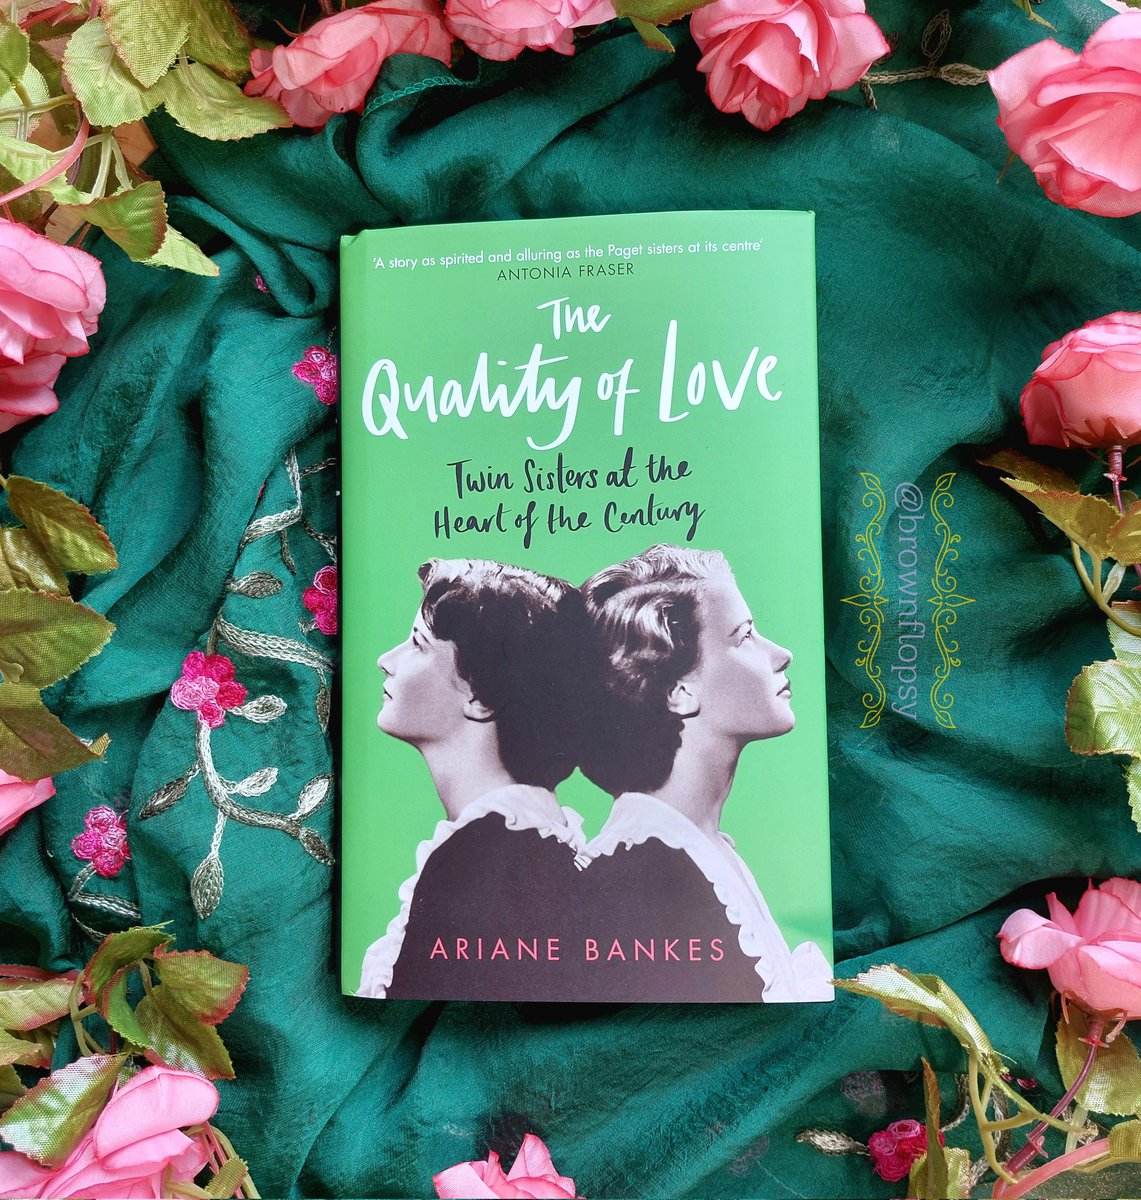 Thank you @Duckbooks for this lovely hb copy of #TheQualityOfLove by @arianebankes about the lives of the Paget sisters, which sounds fascinating. Out 2nd May.
Look out for my review as part of the upcoming @RandomTTours #BlogTour 🤩